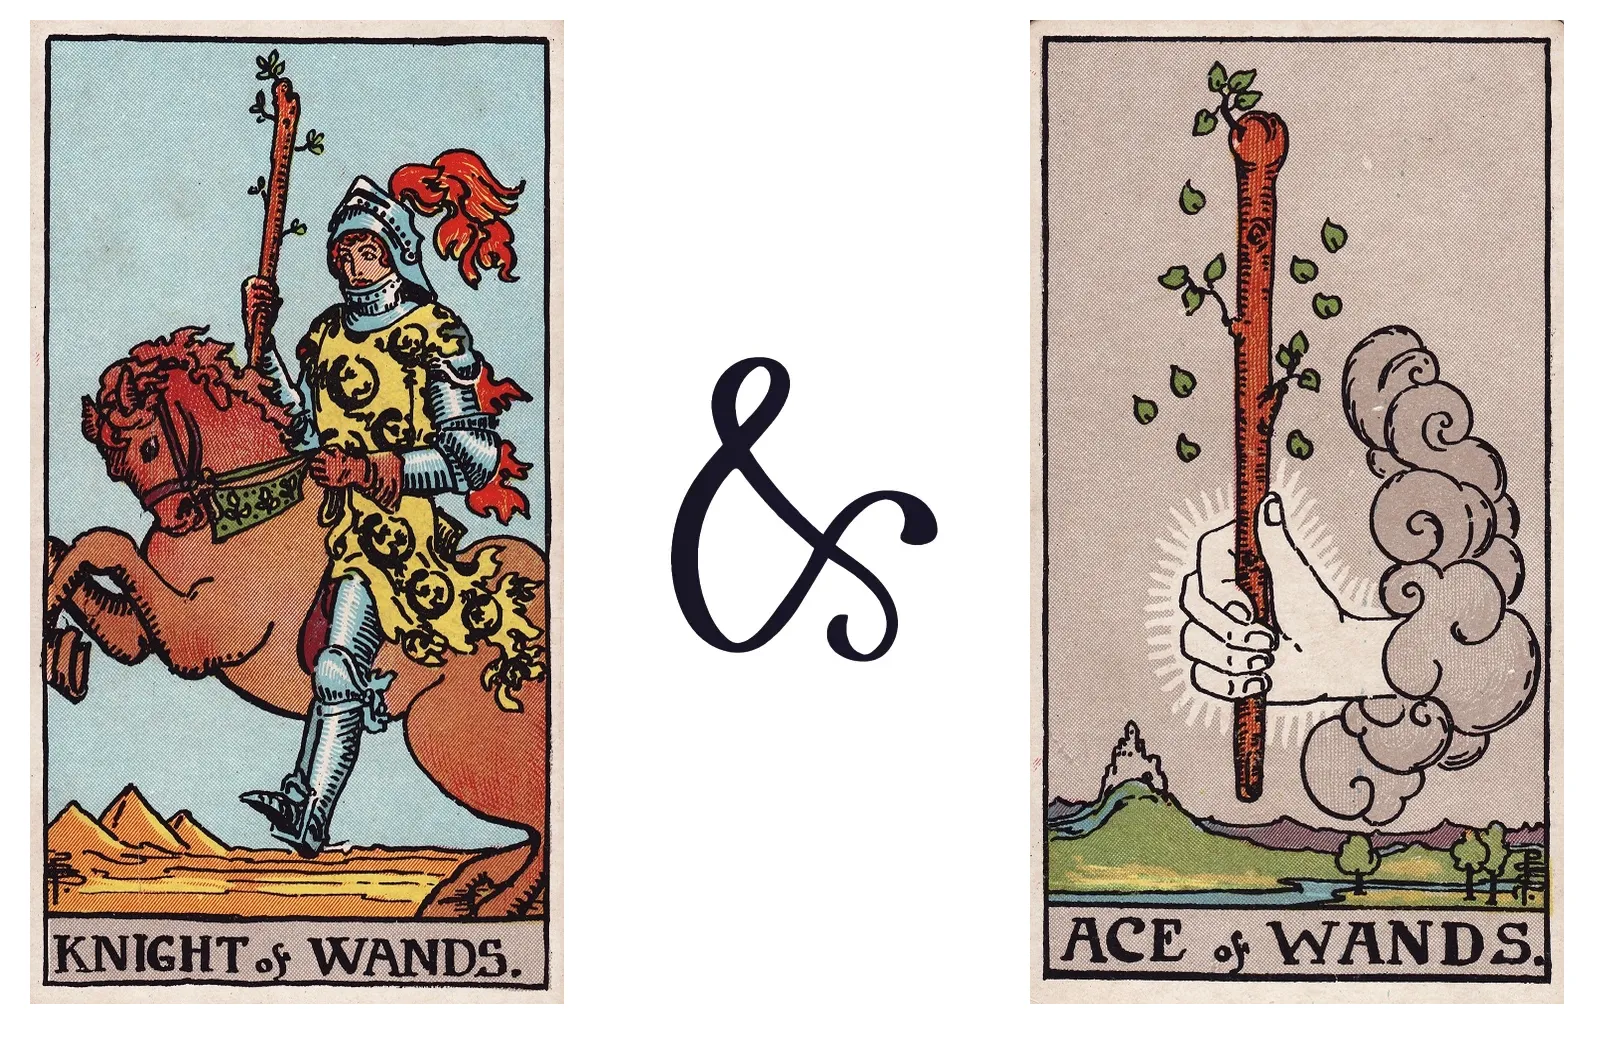 Knight of Wands and Ace of Wands